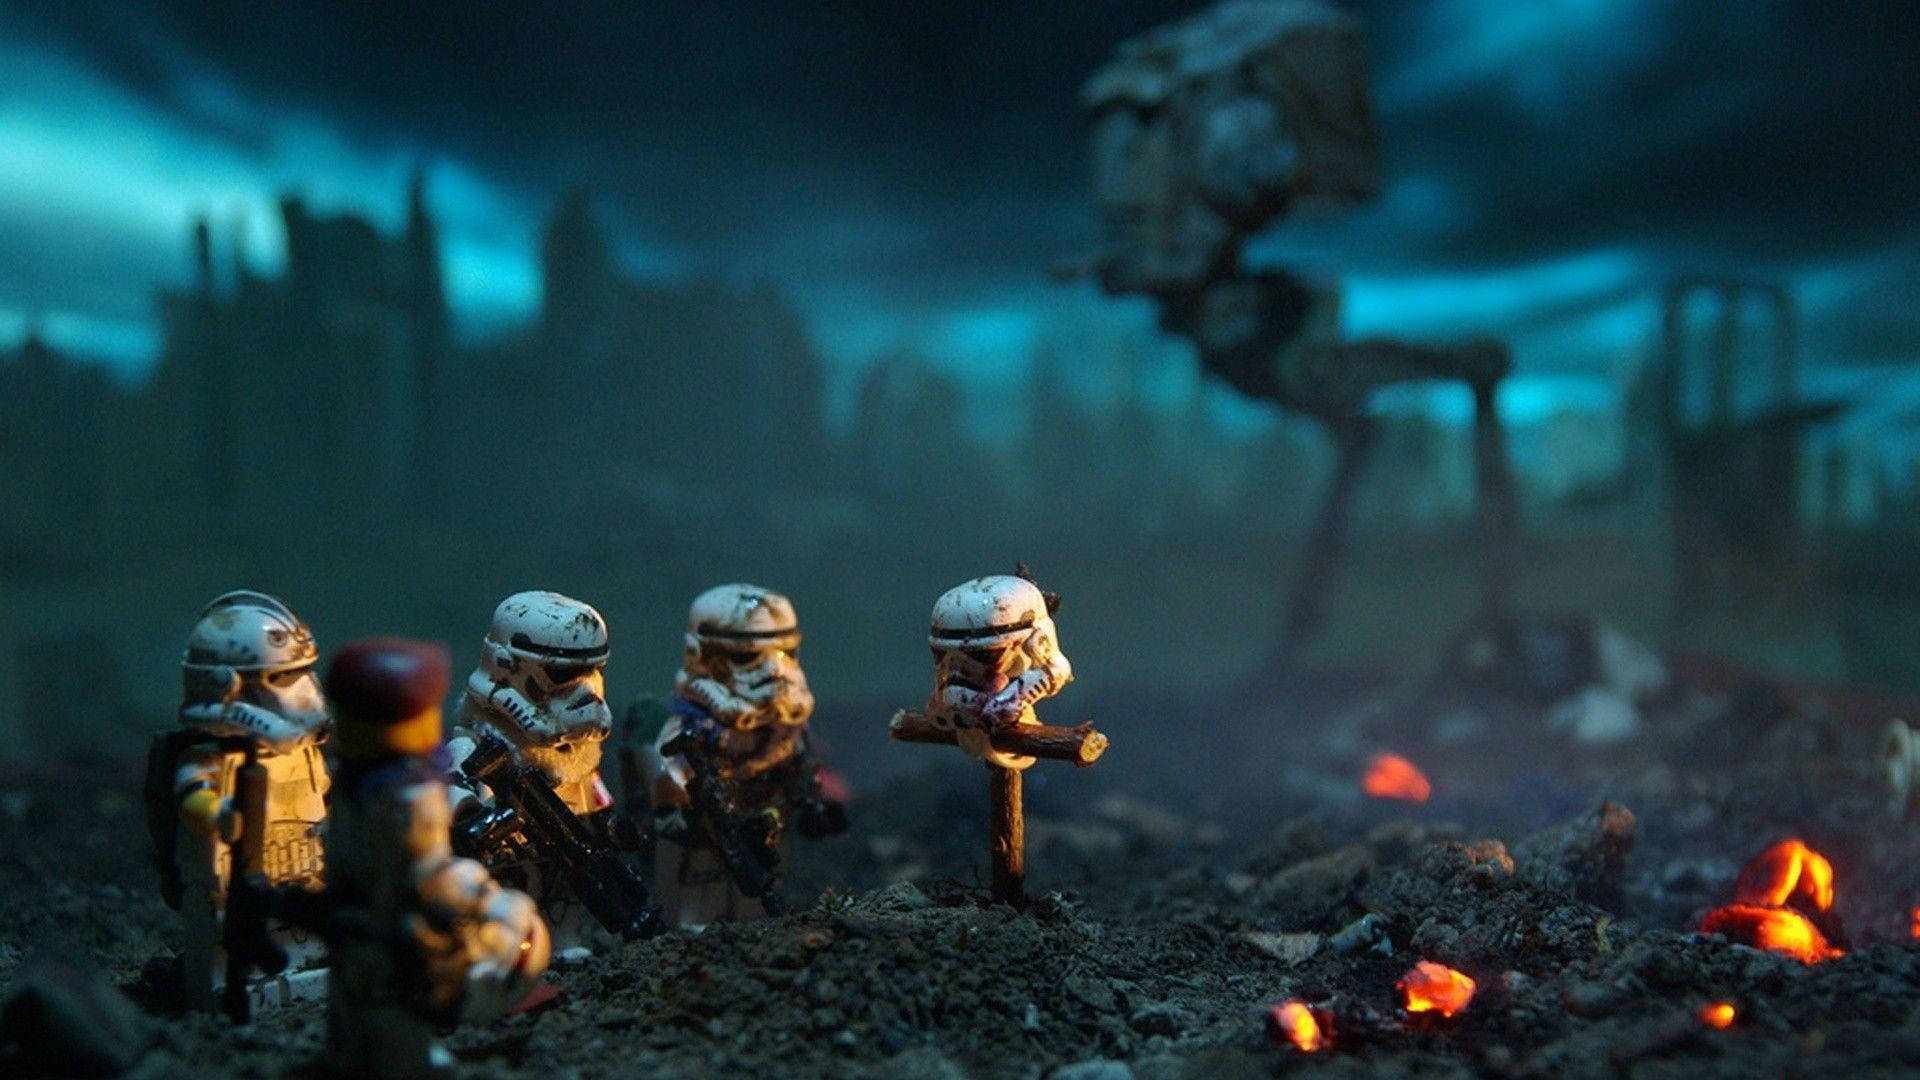 Lego Stormtroopers Cool Hd Wallpaper